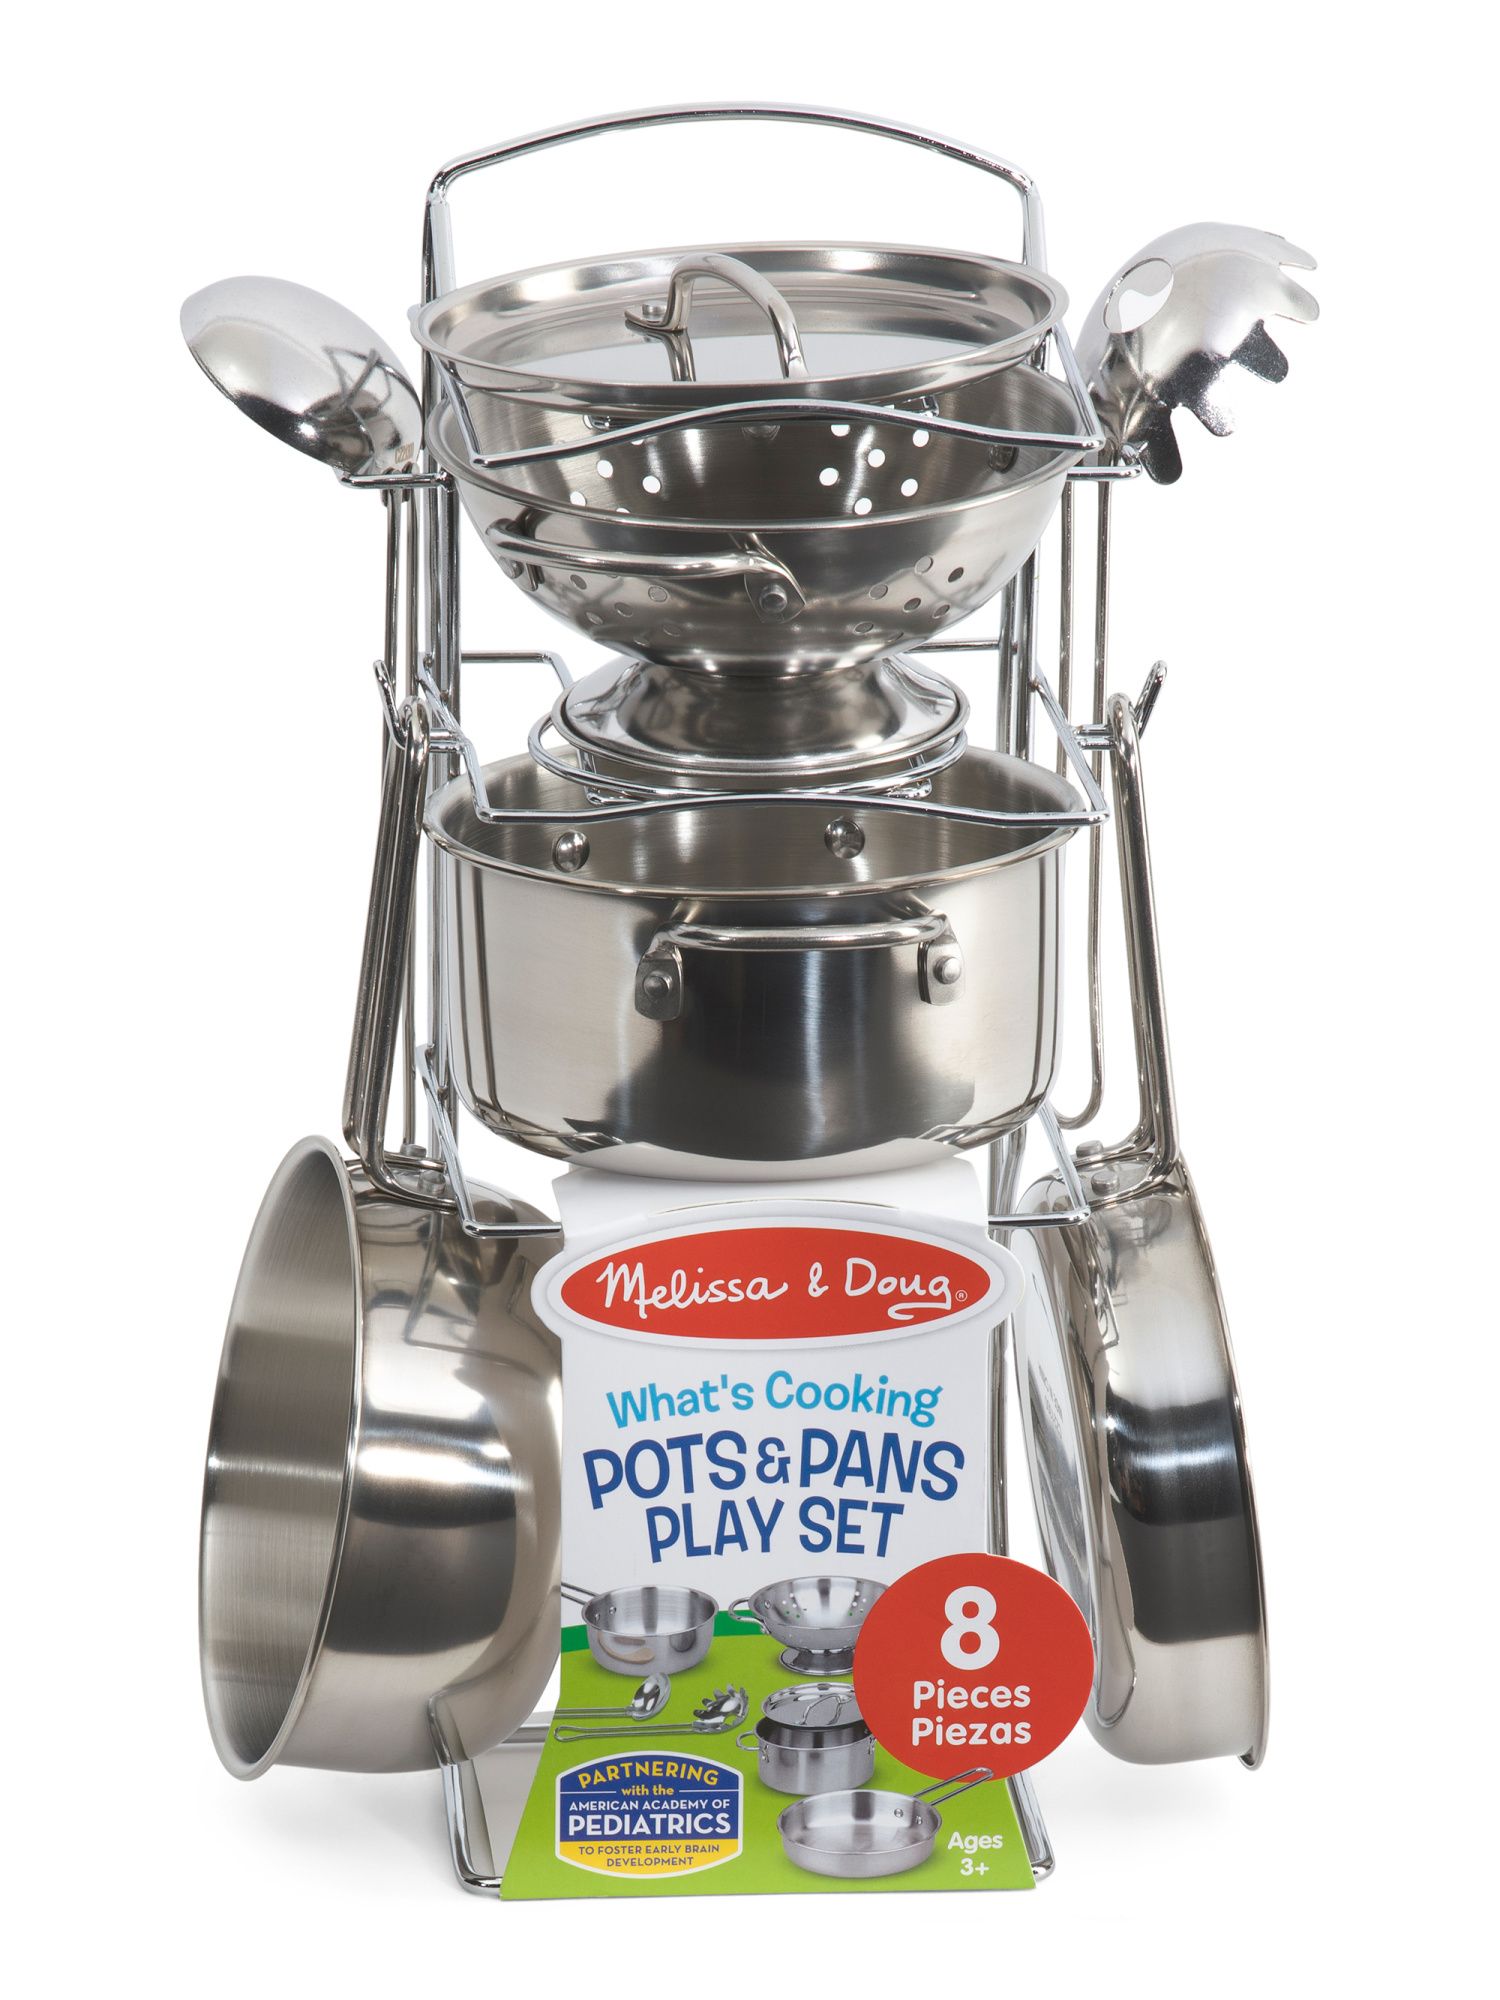 Whats Cooking Pots And Pans Play Set | Toys & Books | Marshalls | Marshalls